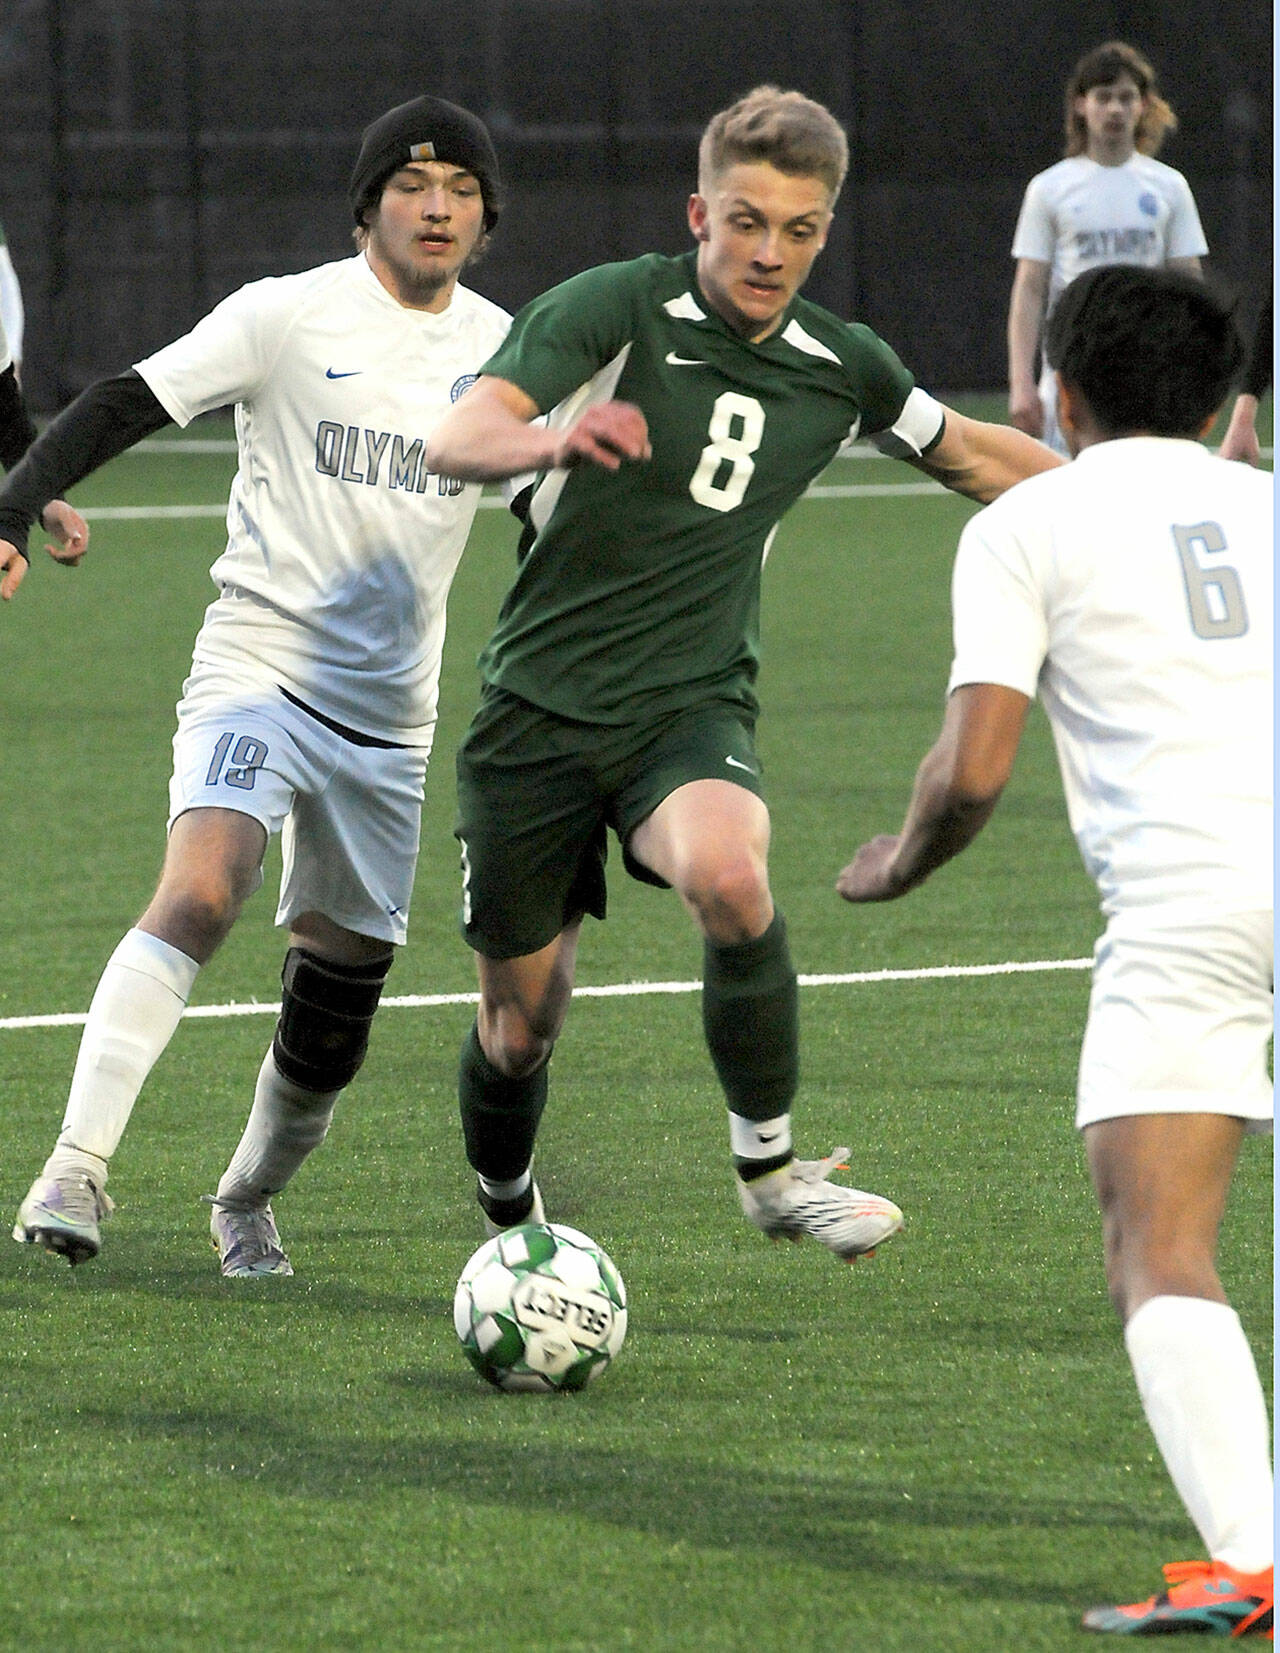 KEITH THORPE/PENINSULA DAILY NEWS Port Angeles’ Jacob Miller, center, works his way pas Olympic’s Gavin Christensen, left, and Chace Guerrero on Thursday night in Port Angeles